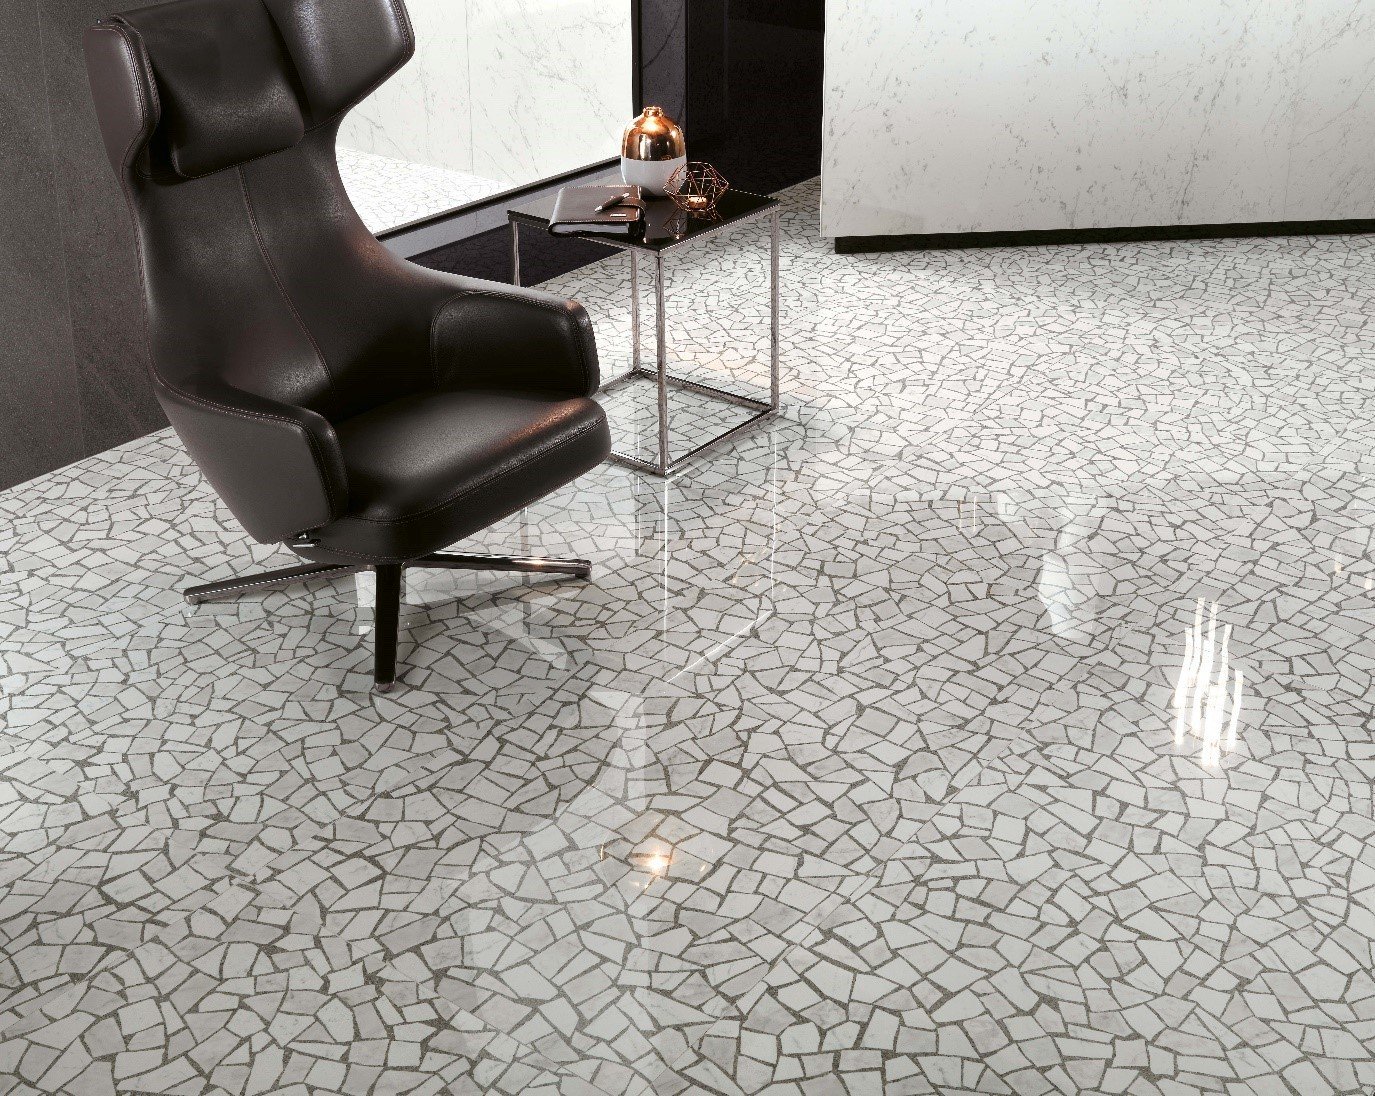 The Surface Within on X: Traditional floors of #terrazzo created for the  present day t.coossjxVOzWj #Minoli Gemstones Palladiana Carrara  #tiles are produced with a high shine finish on a #porcelain body, featuring